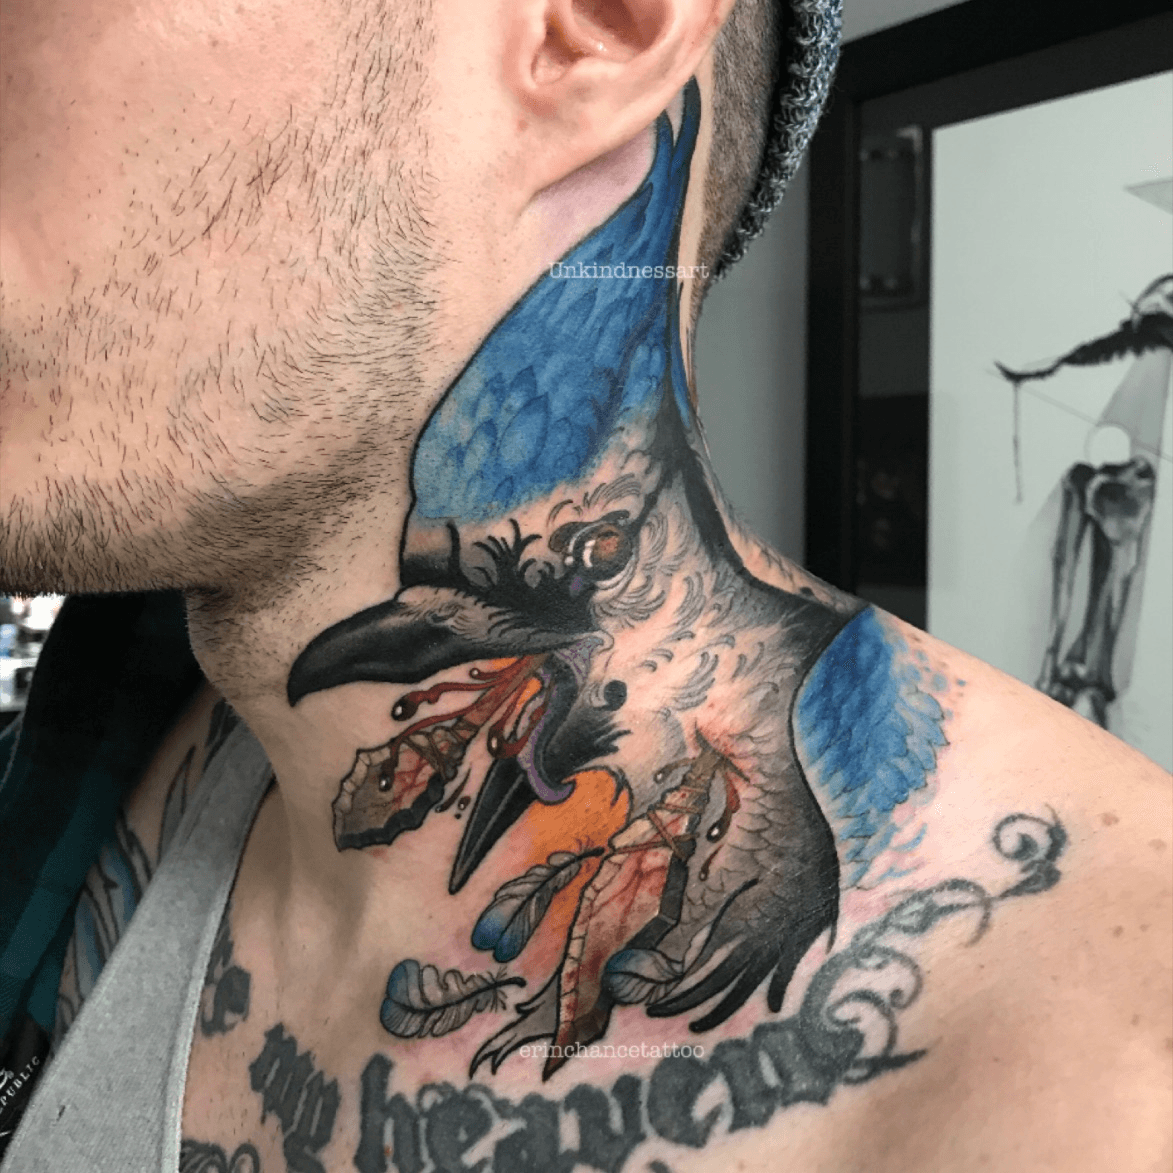 The Girl With the Accidental Blue Jays Neck Tattoo